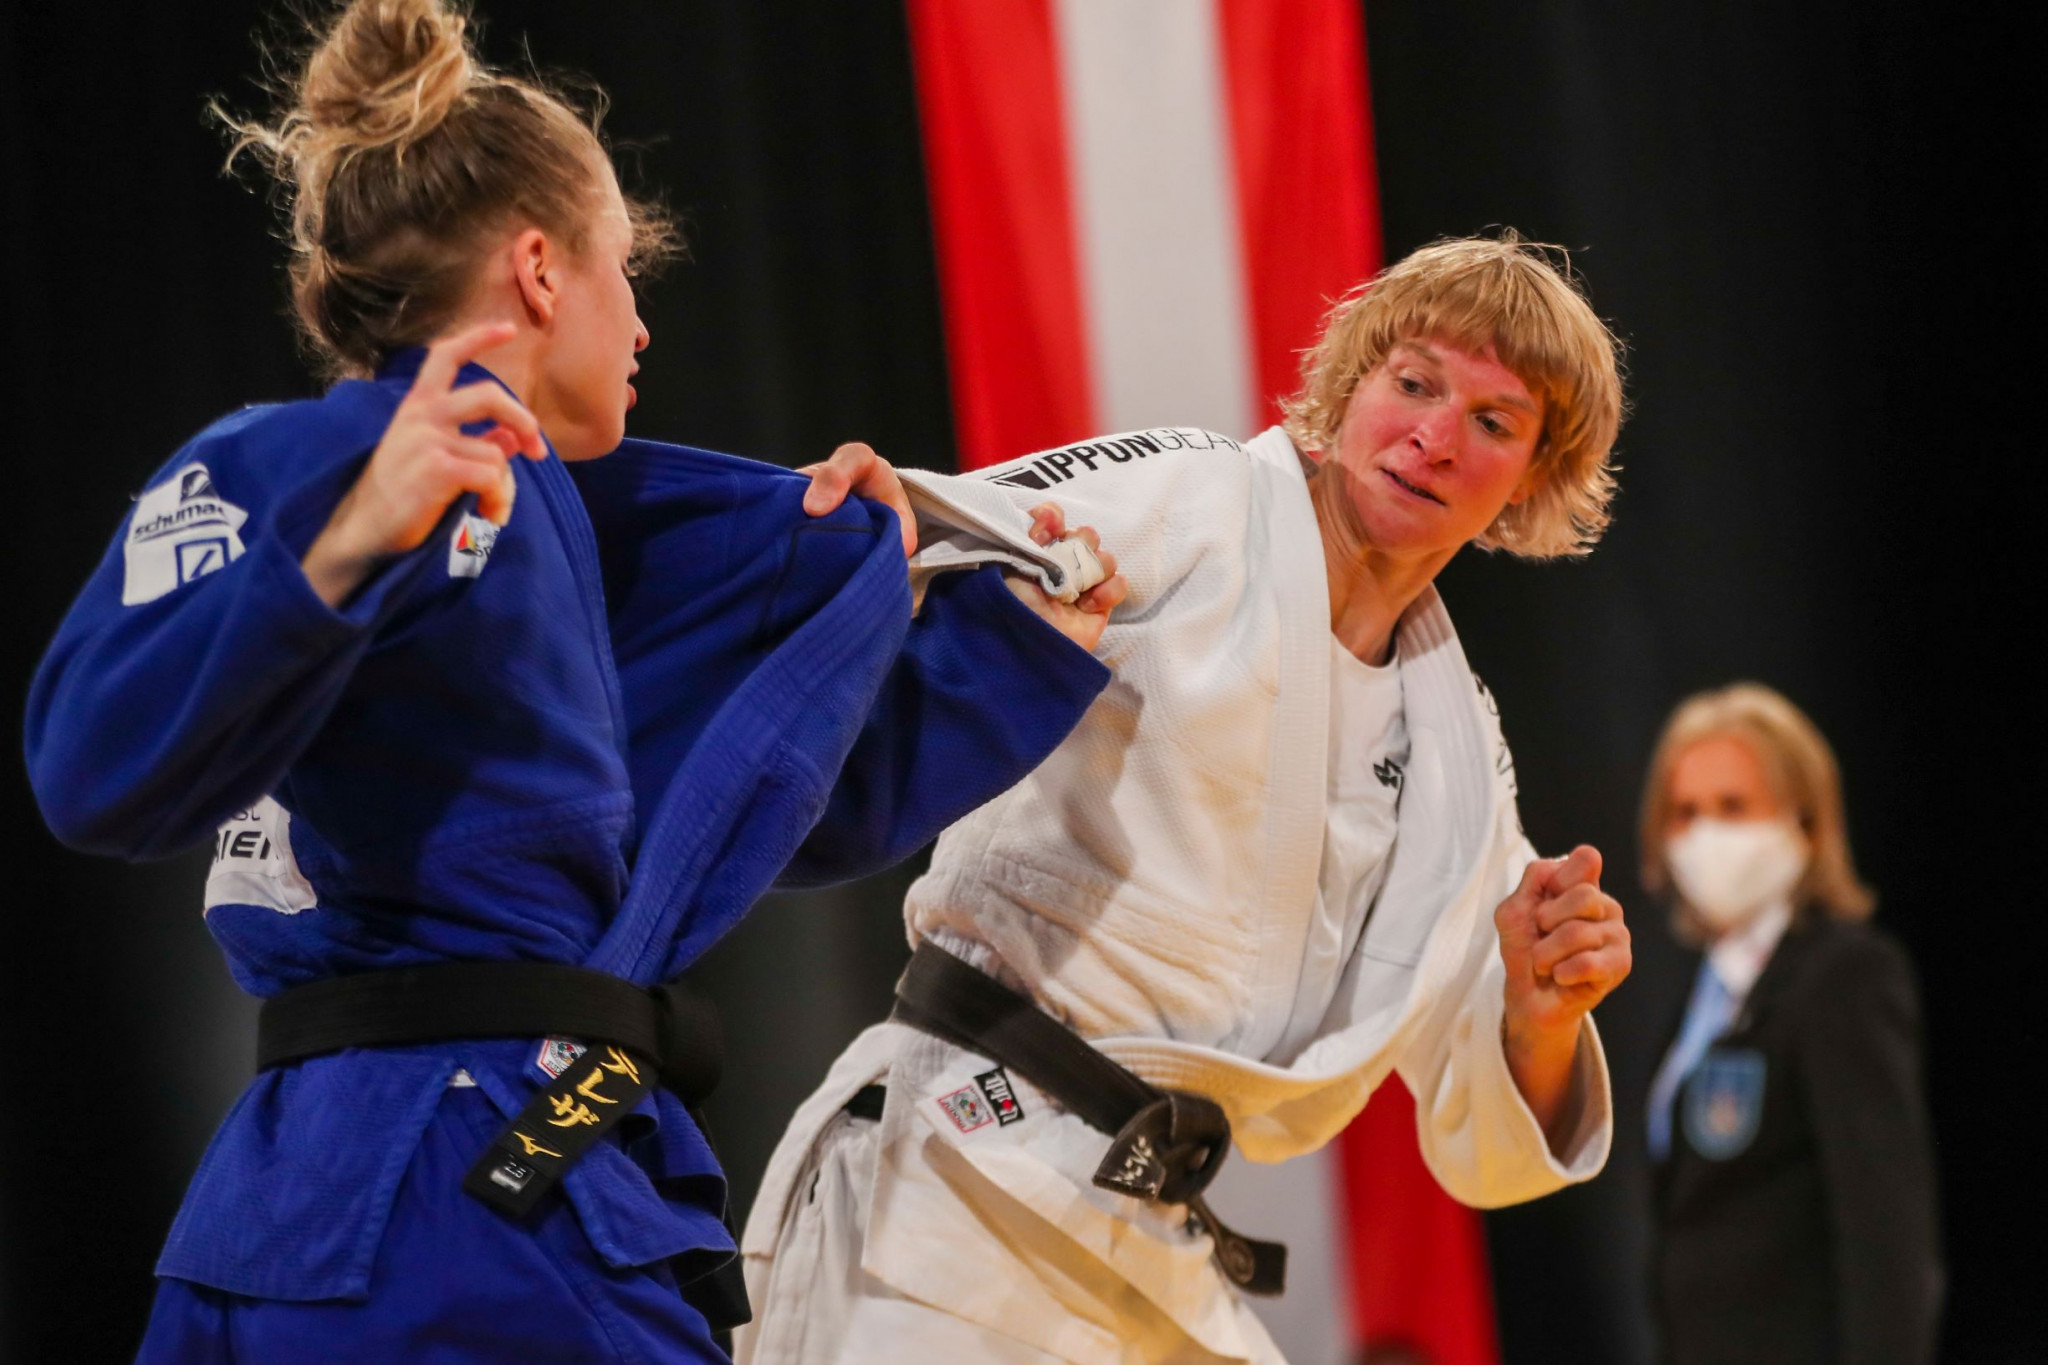 Germany narrowly defeat Austria in team judo competition